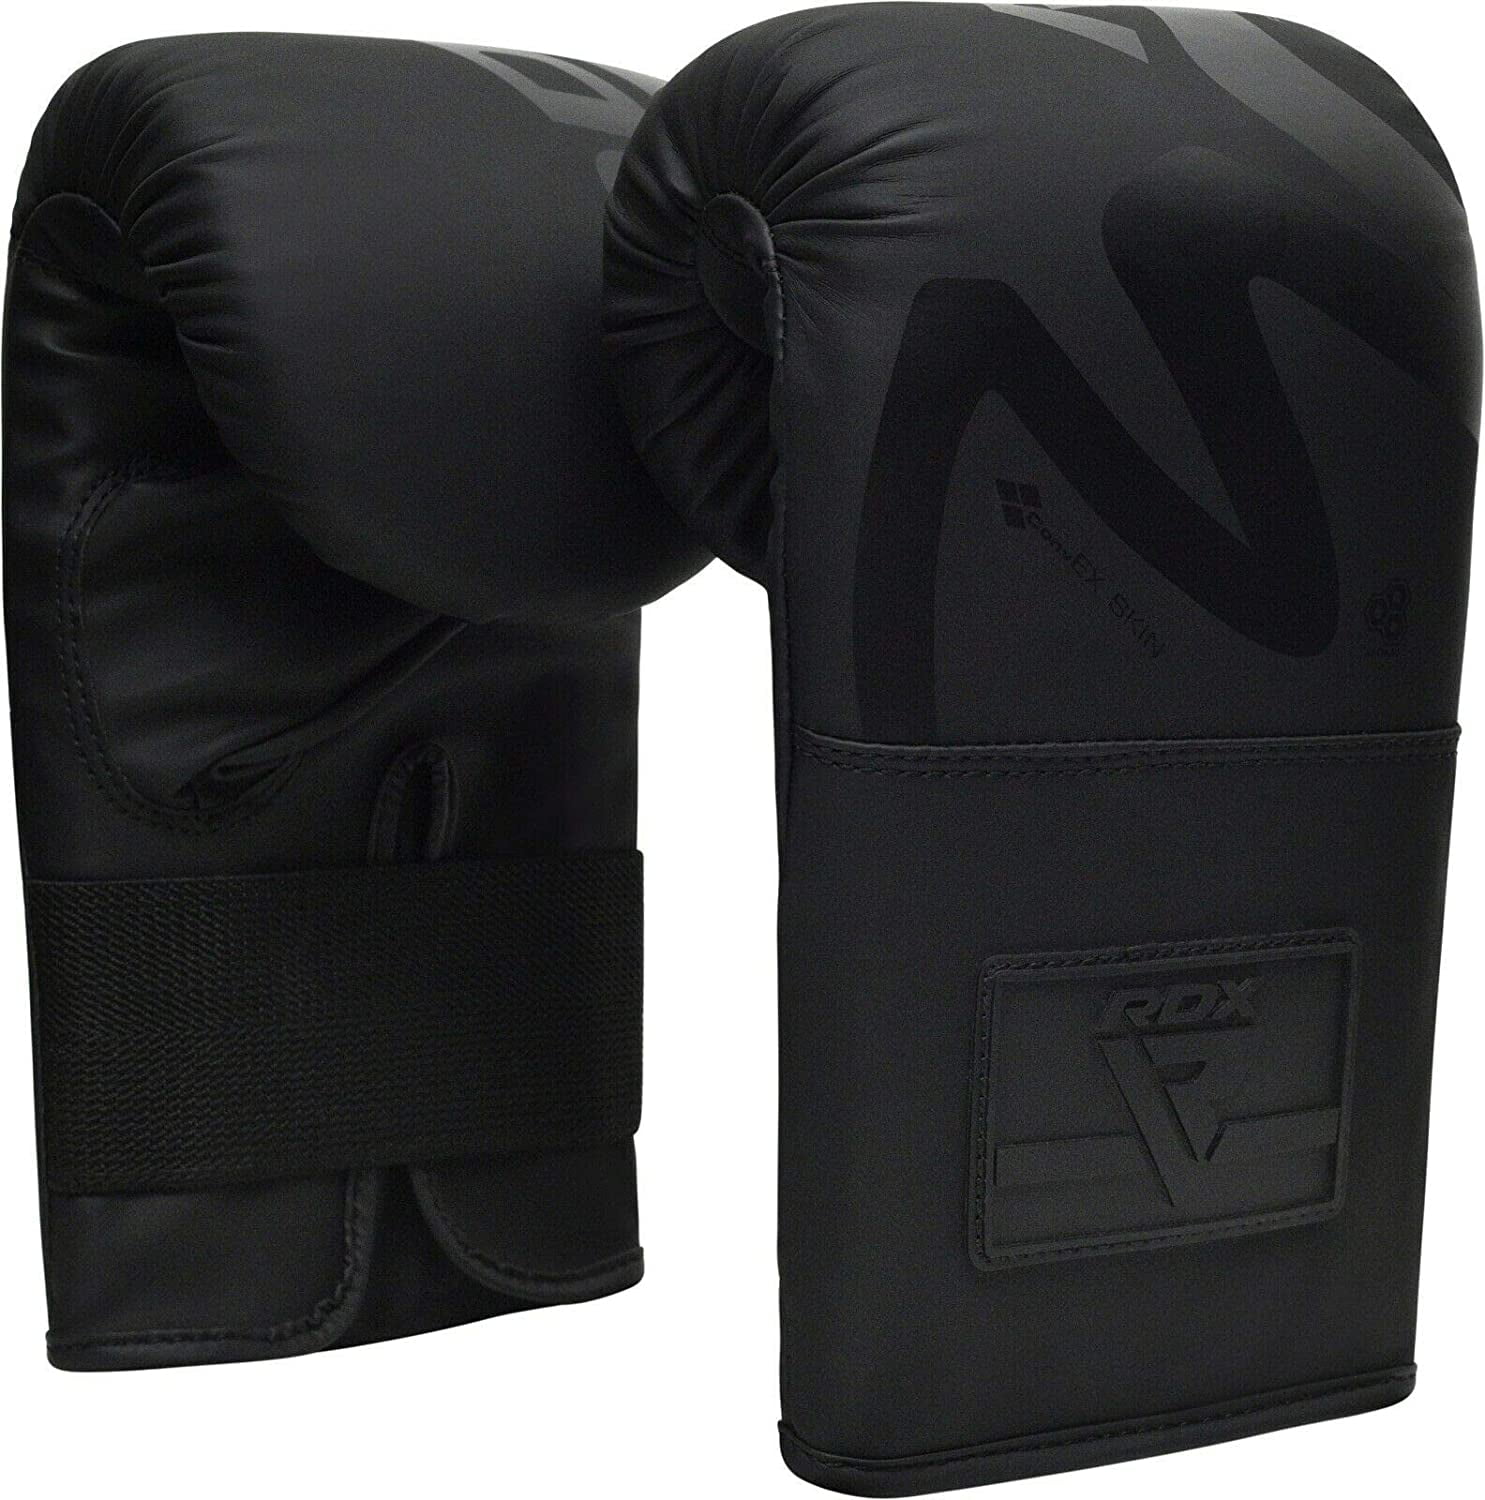 Fight Training BeSmart Focus Pads Hook Jab Mitts Boxing MMA Martial Arts 